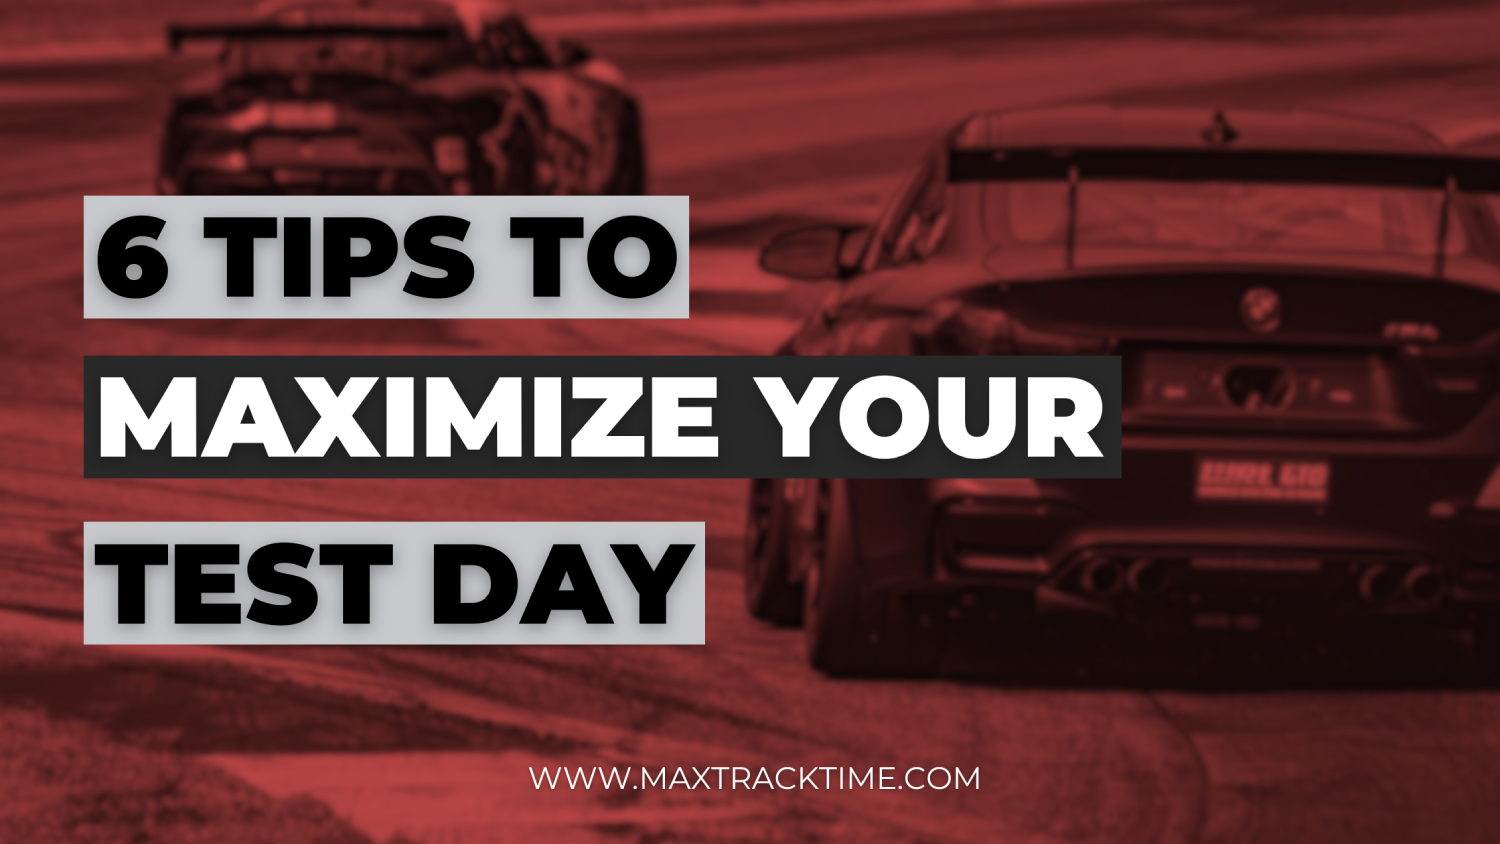 6 Tips to Maximize Your Test Day Blog Banner (1)